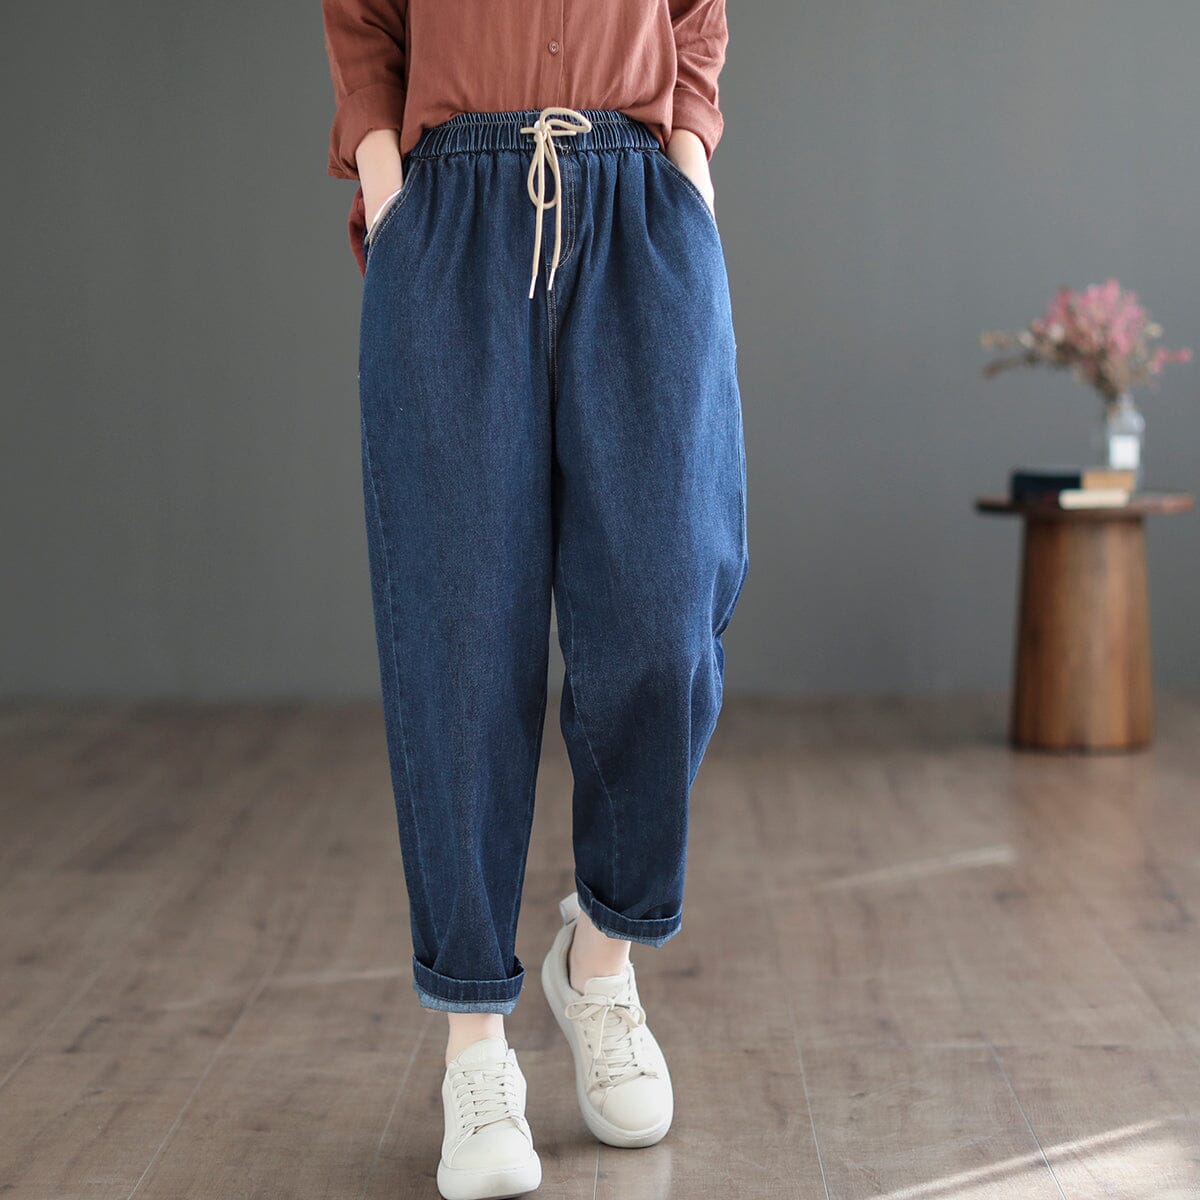 Spring Casual Solid Loose Harem Cotton Jeans Jan 2023 New Arrival 